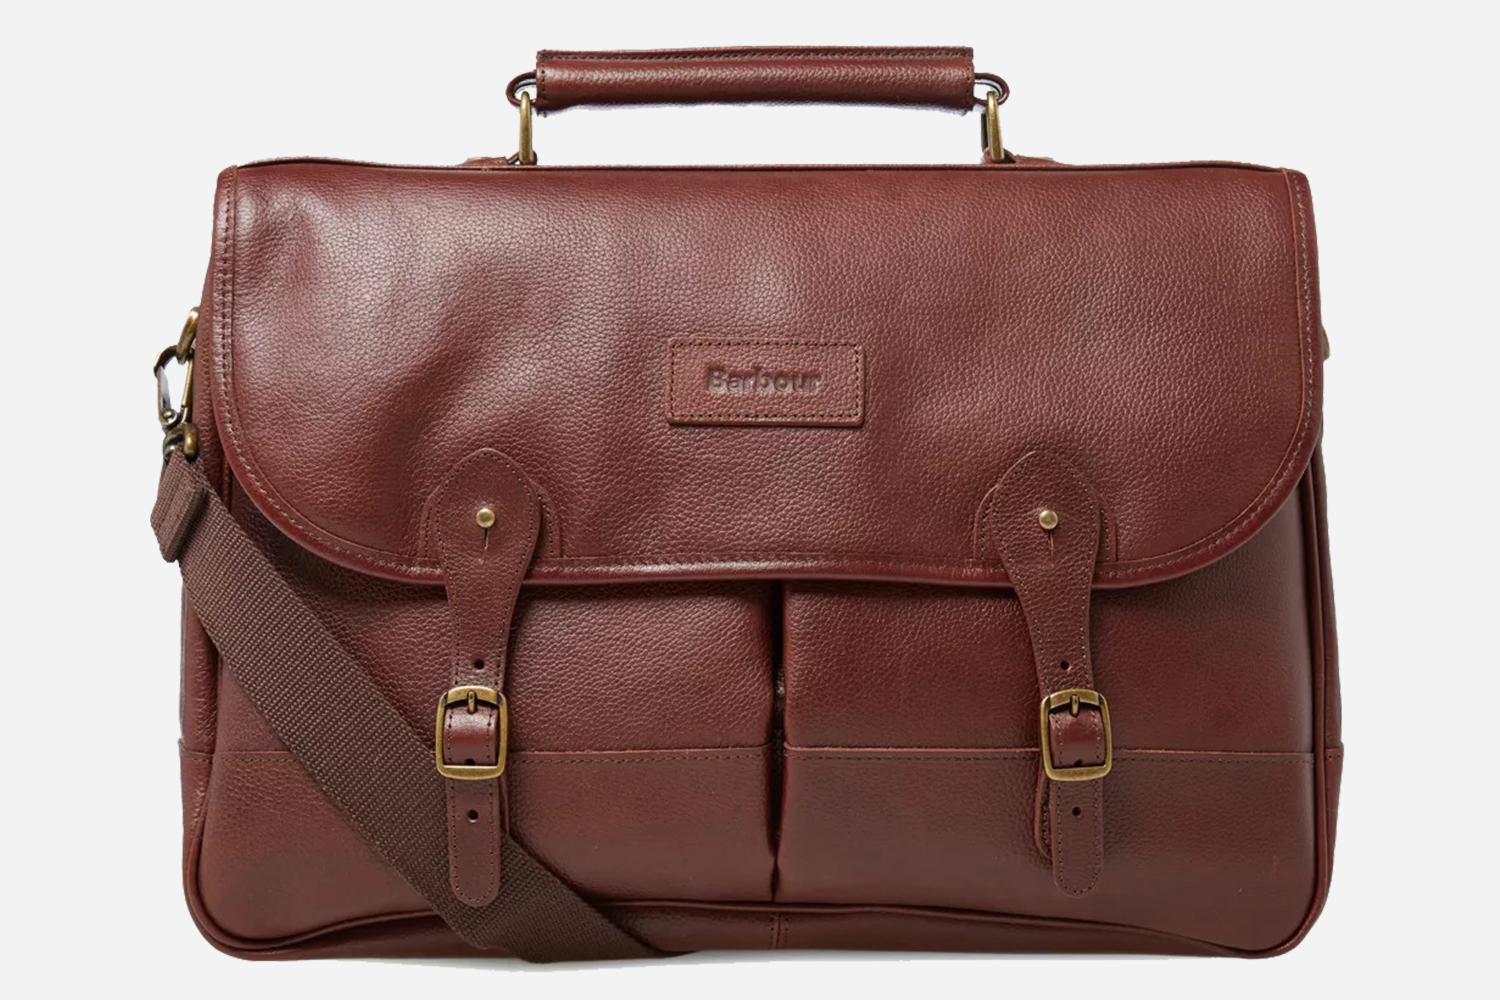 Barbour Discount on Brown Leather Briefcases